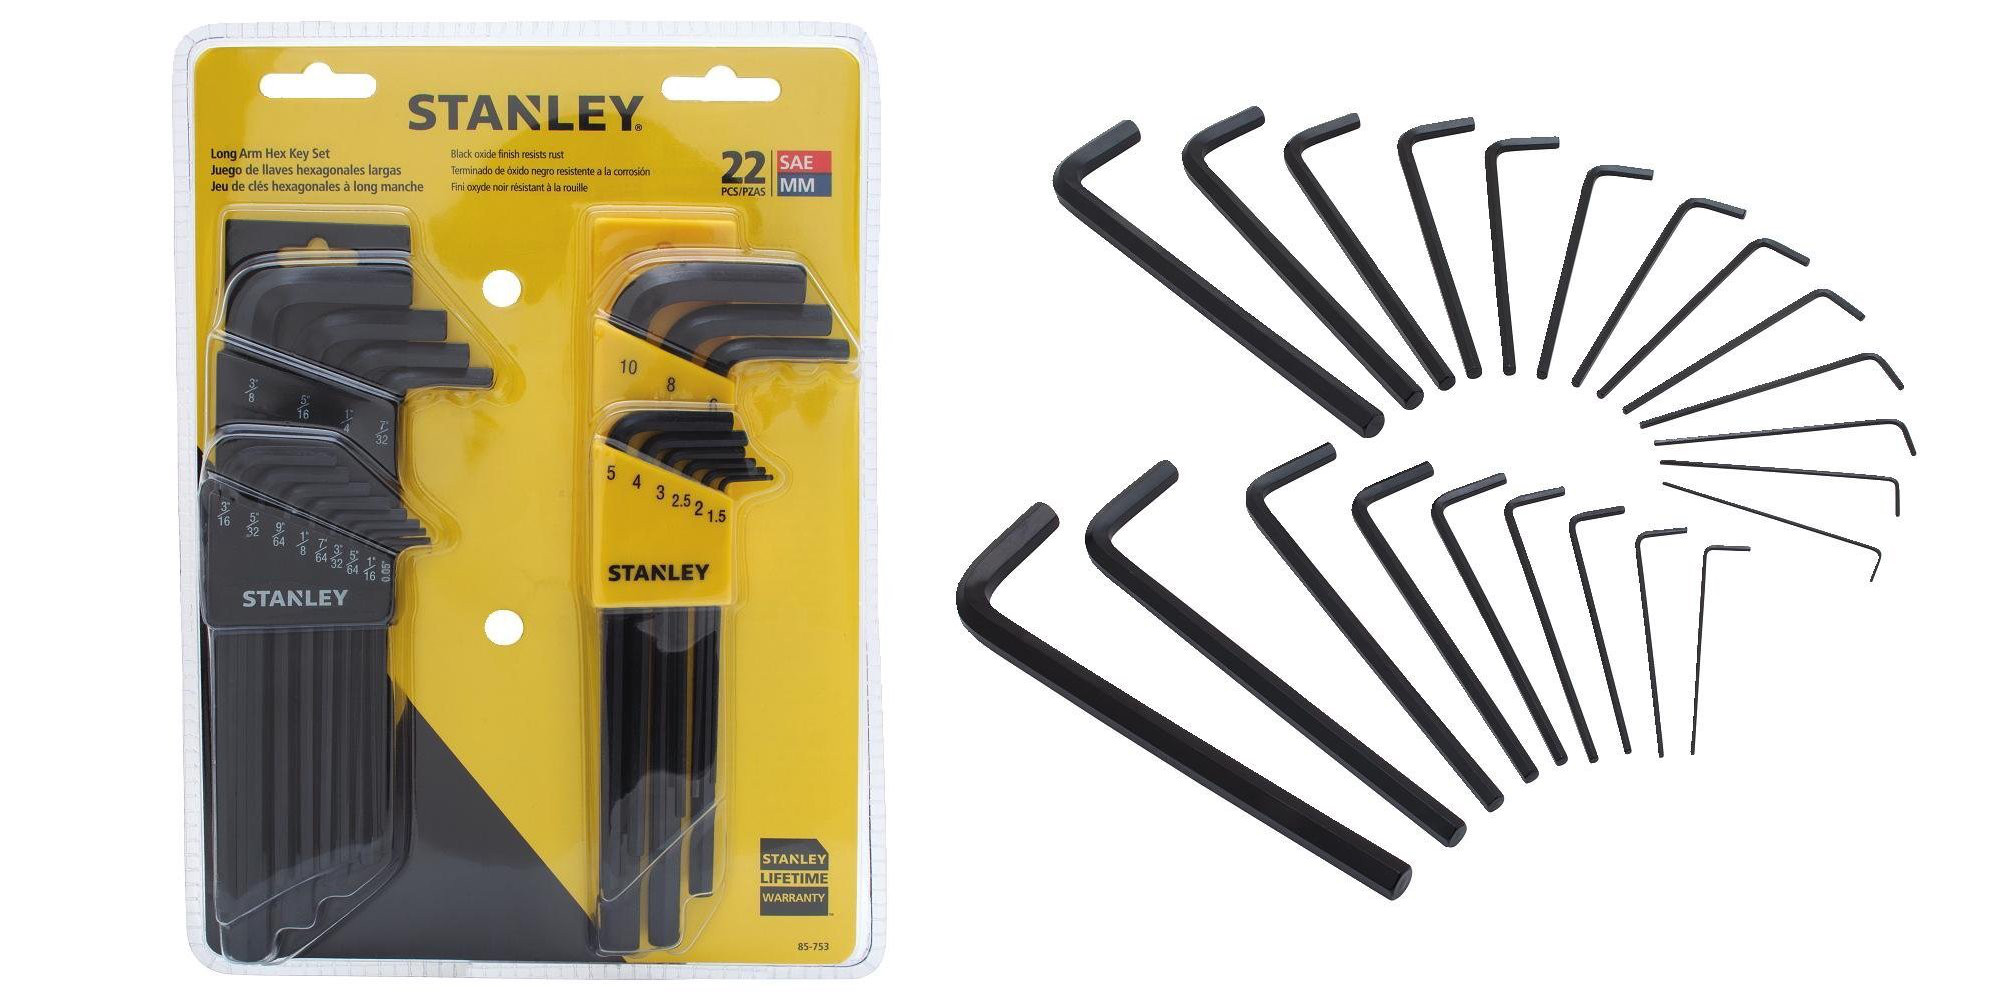 https://9to5toys.com/wp-content/uploads/sites/5/2017/03/stanley-22-piece-long-arm-sae-metric-hex-key-set.jpg?quality=82&strip=all